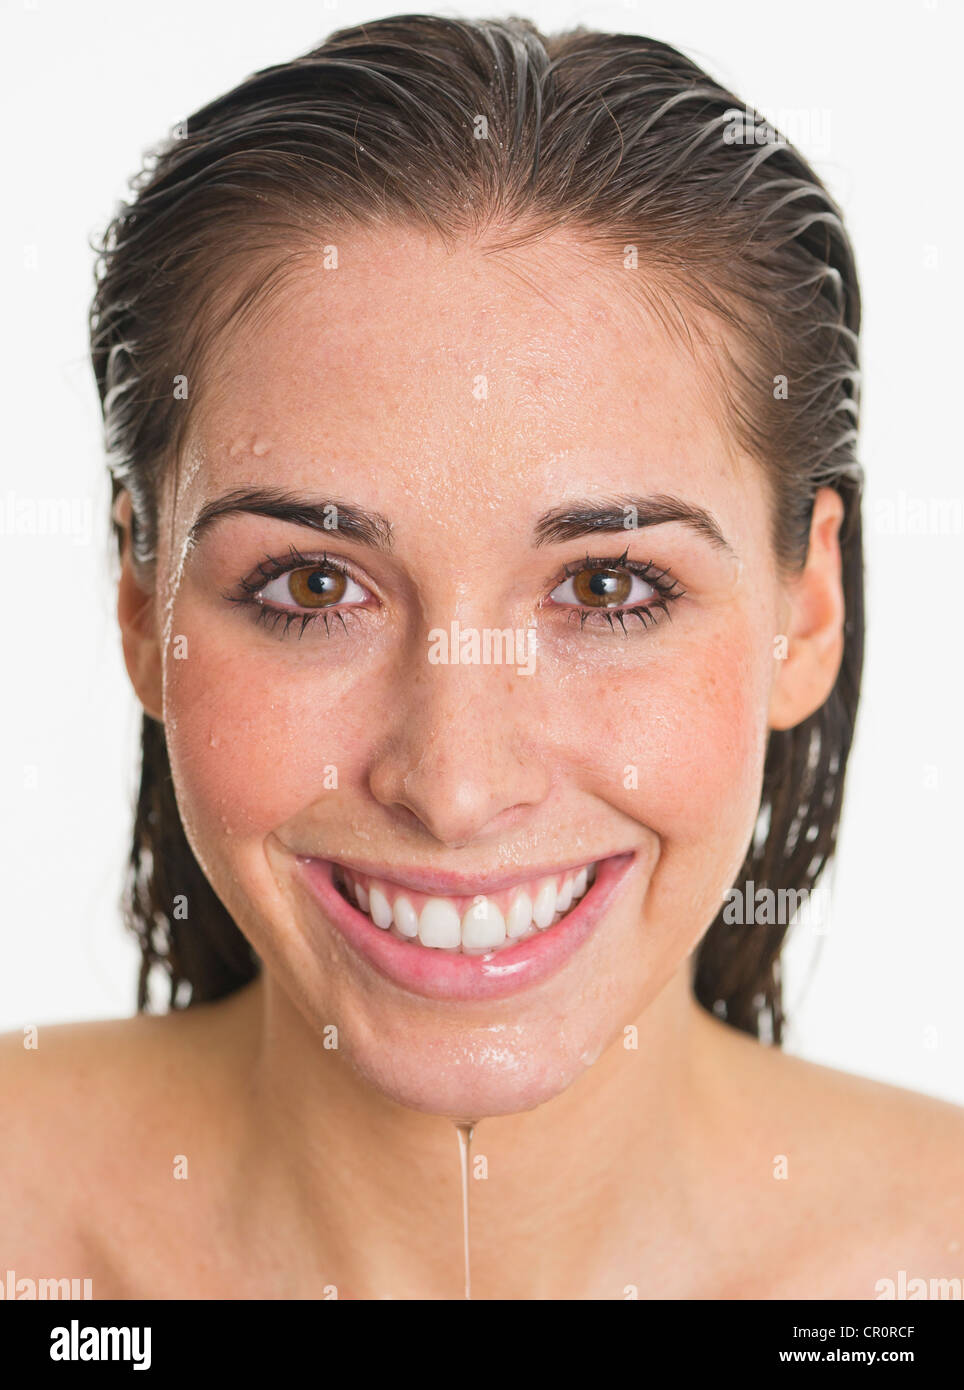 Studio portrait of woman with wet face Stock Photo